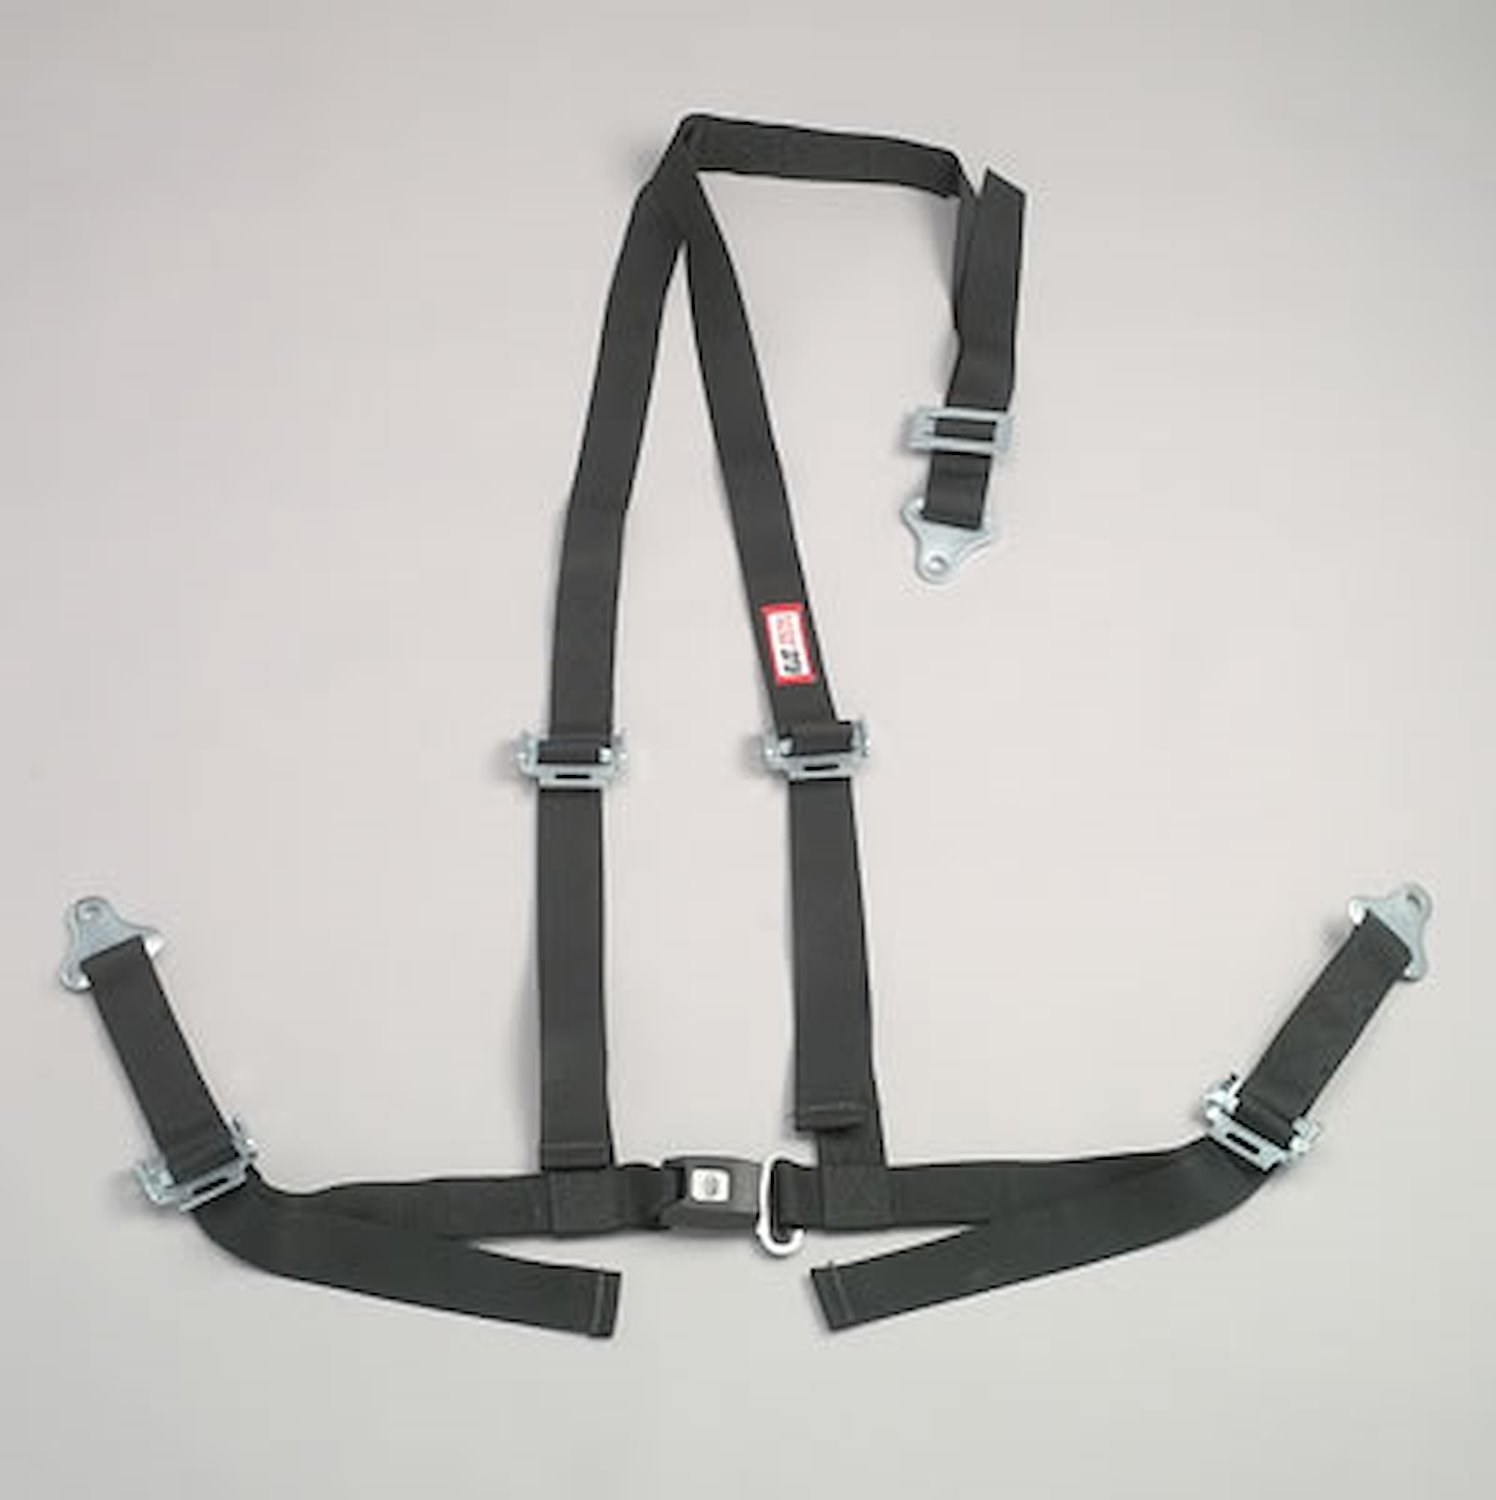 NON-SFI B&T HARNESS 2 PULL UP Lap Belt SNAP 2 S. H. Y FLOOR Mount WRAP/SNAP w/STERNUM STRAP OD GREEN